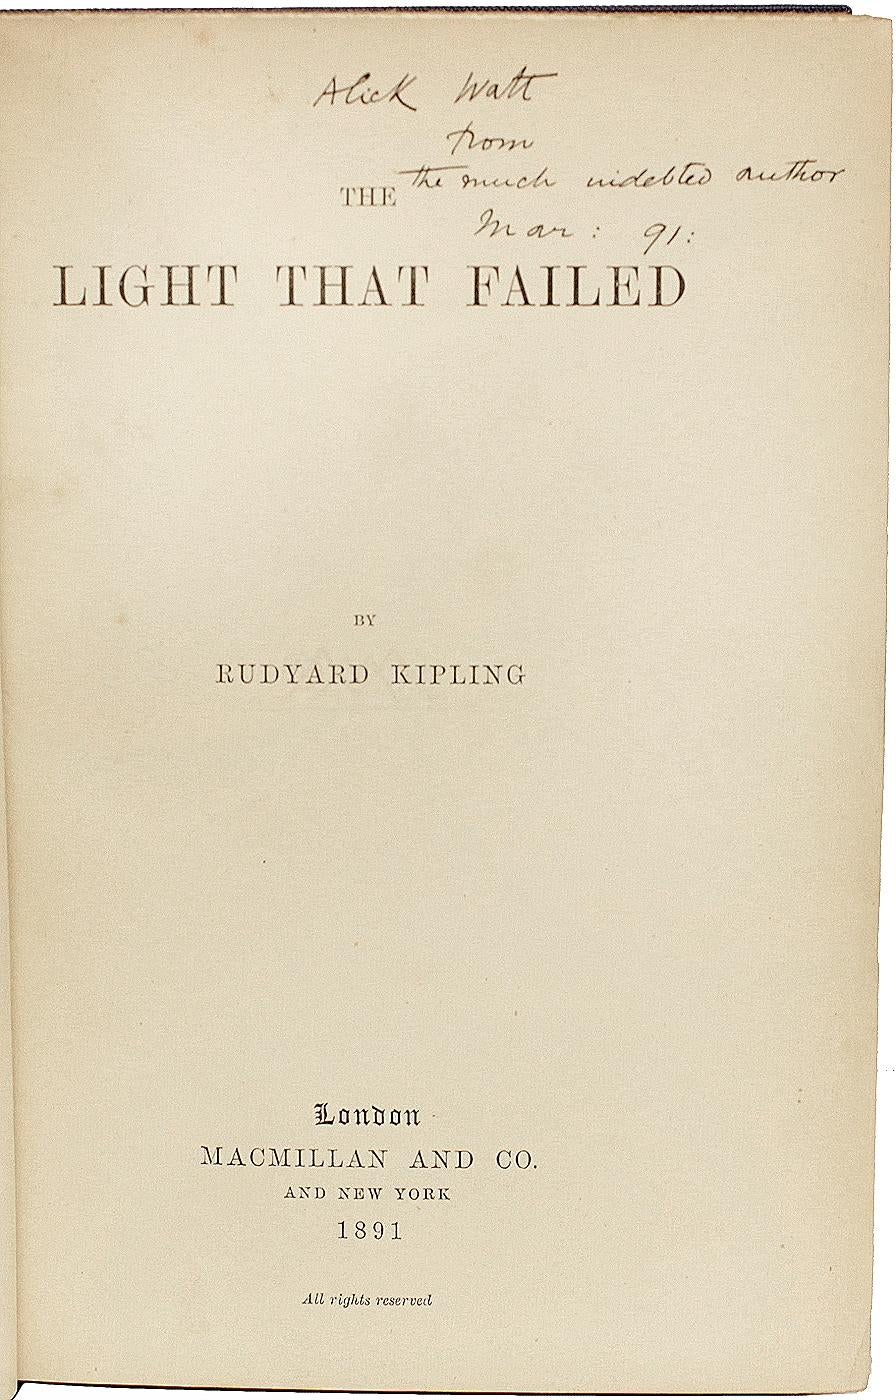 AUTHOR: KIPLING, Rudyard. 

TITLE: The Light That Failed.

PUBLISHER: London: Macmillan & Co., 1891.

DESCRIPTION: FIRST EDITION PRESENTATION COPY. 1 vol., inscribed by Kipling on the title-page 